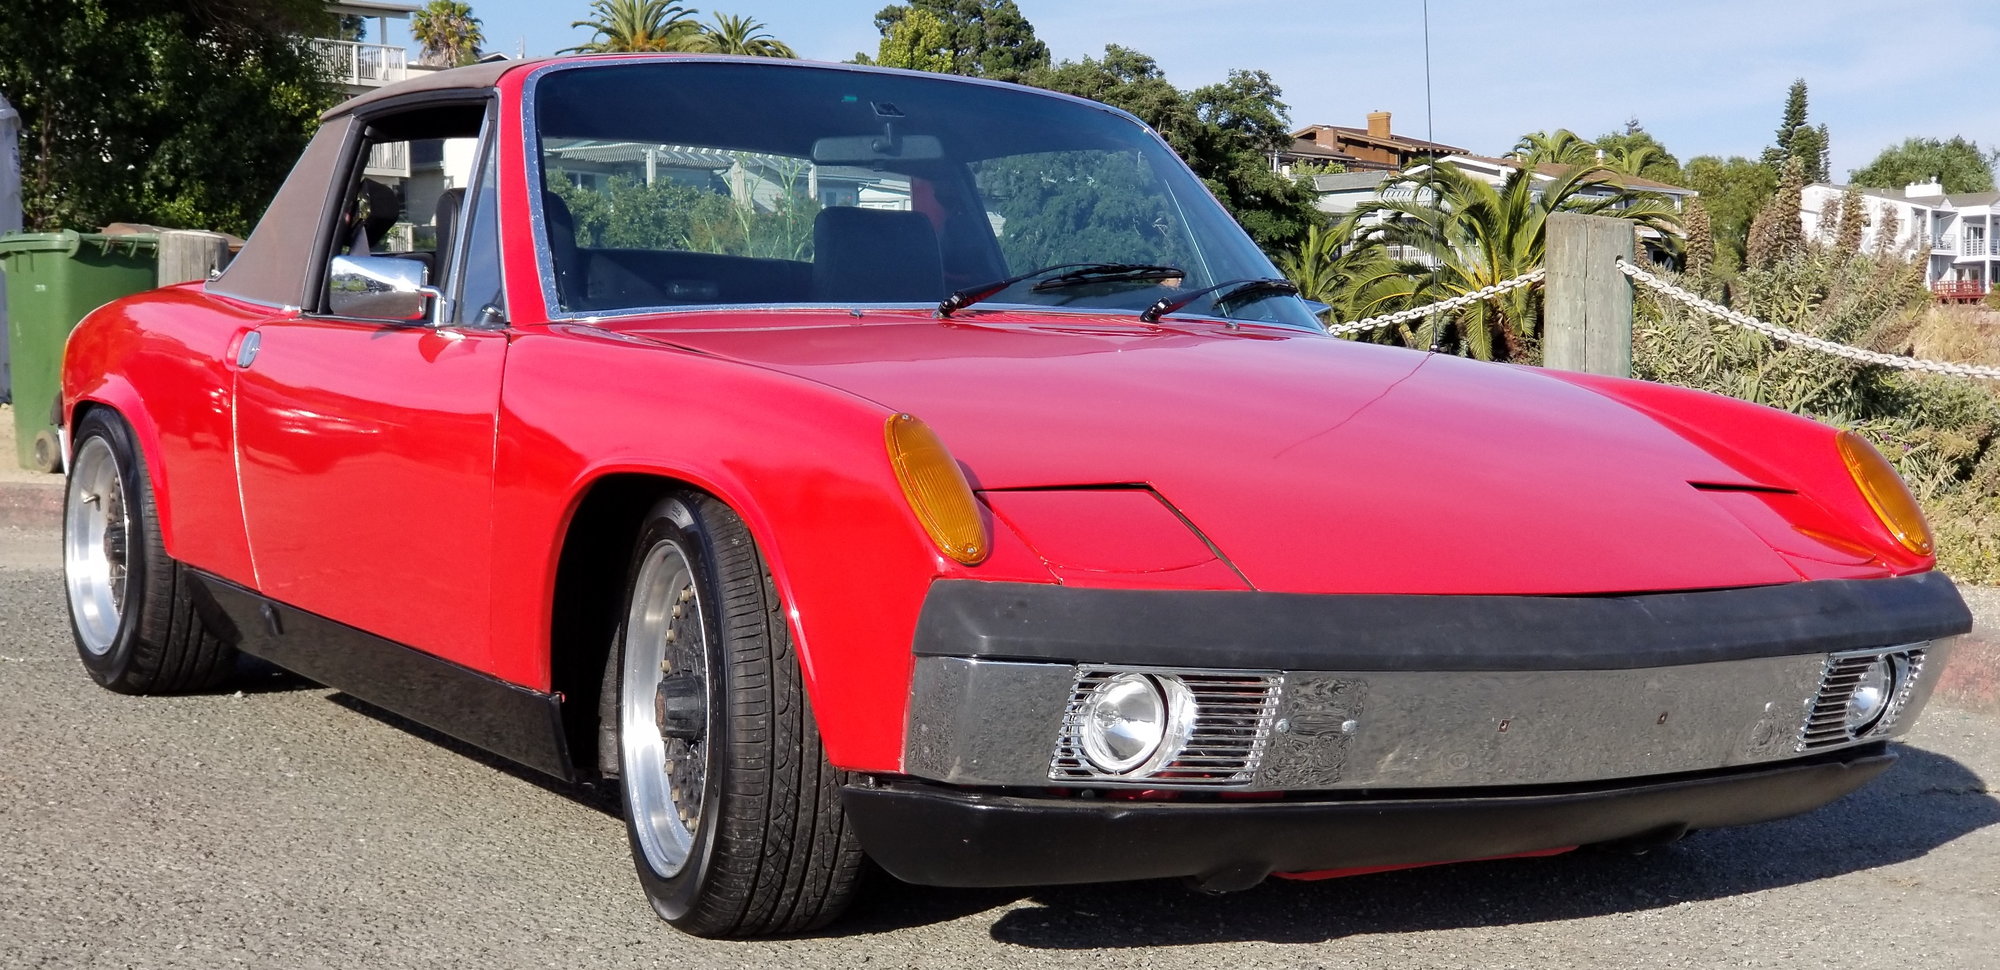 1972 Porsche 914 - 1972 914/4 Restored For Sale - Used - VIN 4712912707 - 75,000 Miles - 4 cyl - 2WD - Manual - Coupe - Red - Sf Bay Area, CA 94510, United States